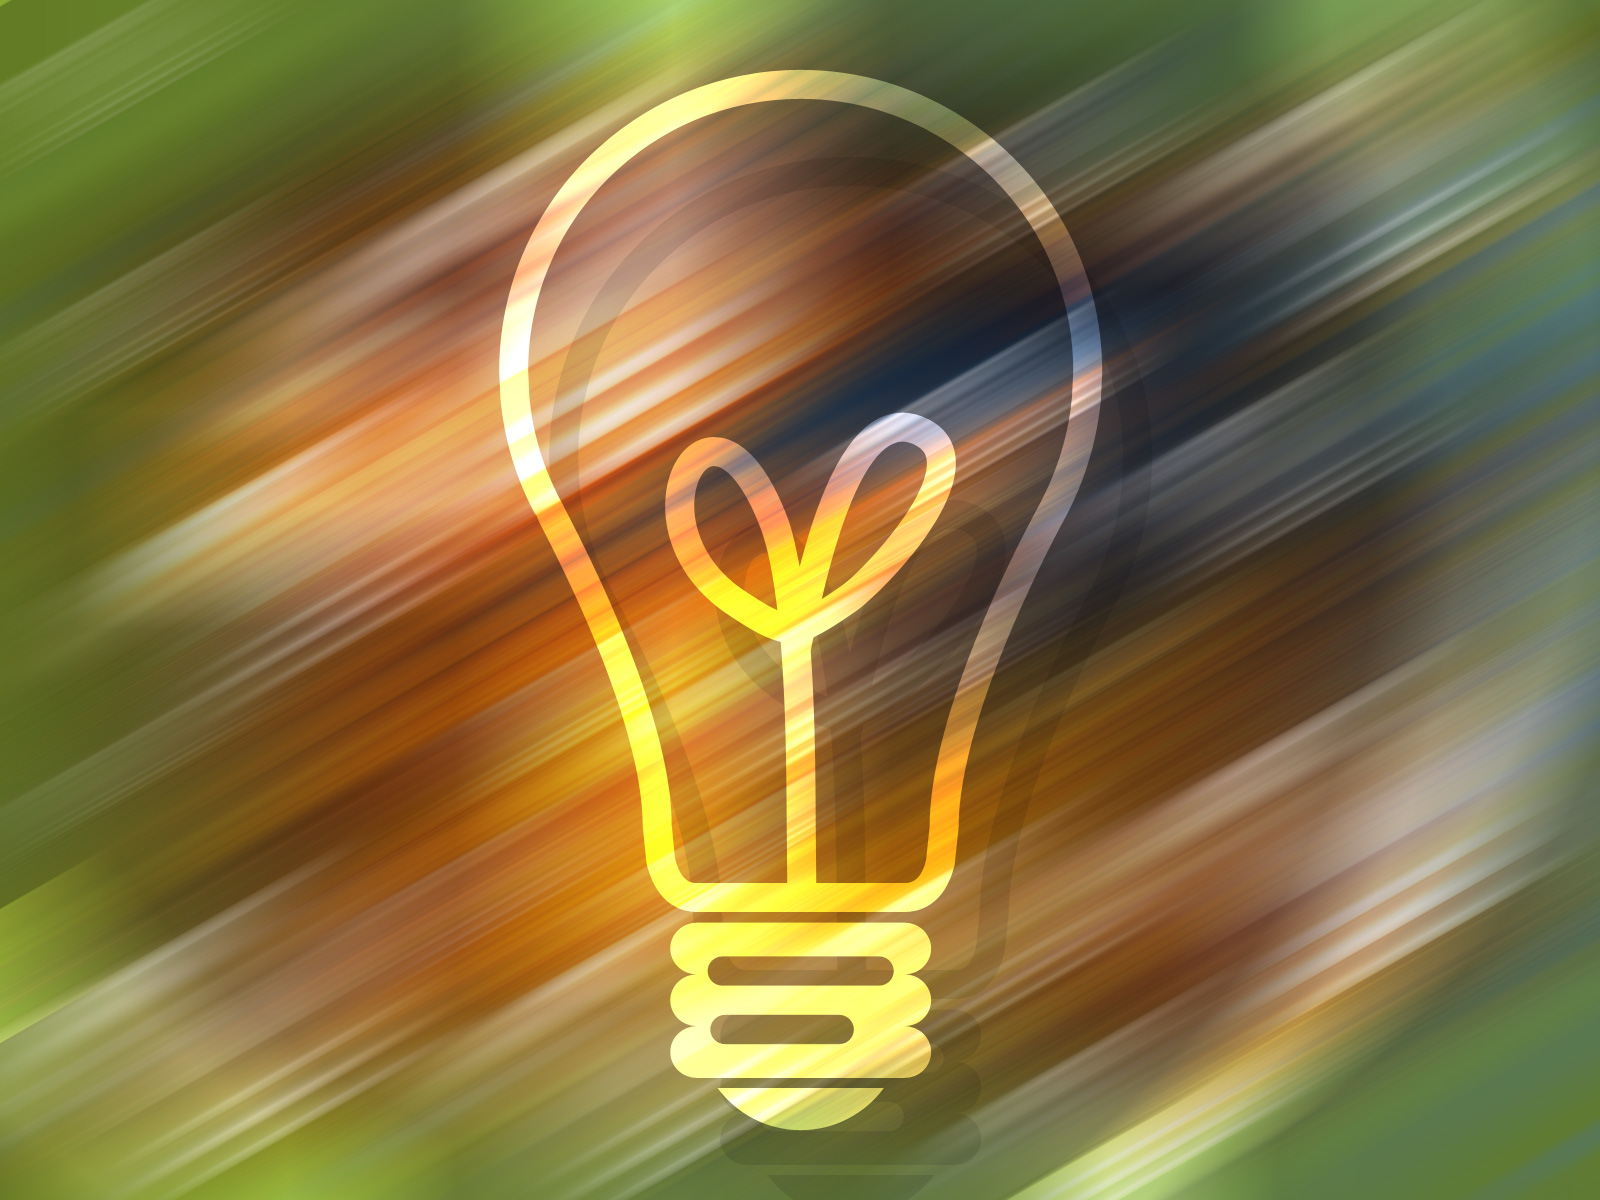 Light bulb icon on abstract background